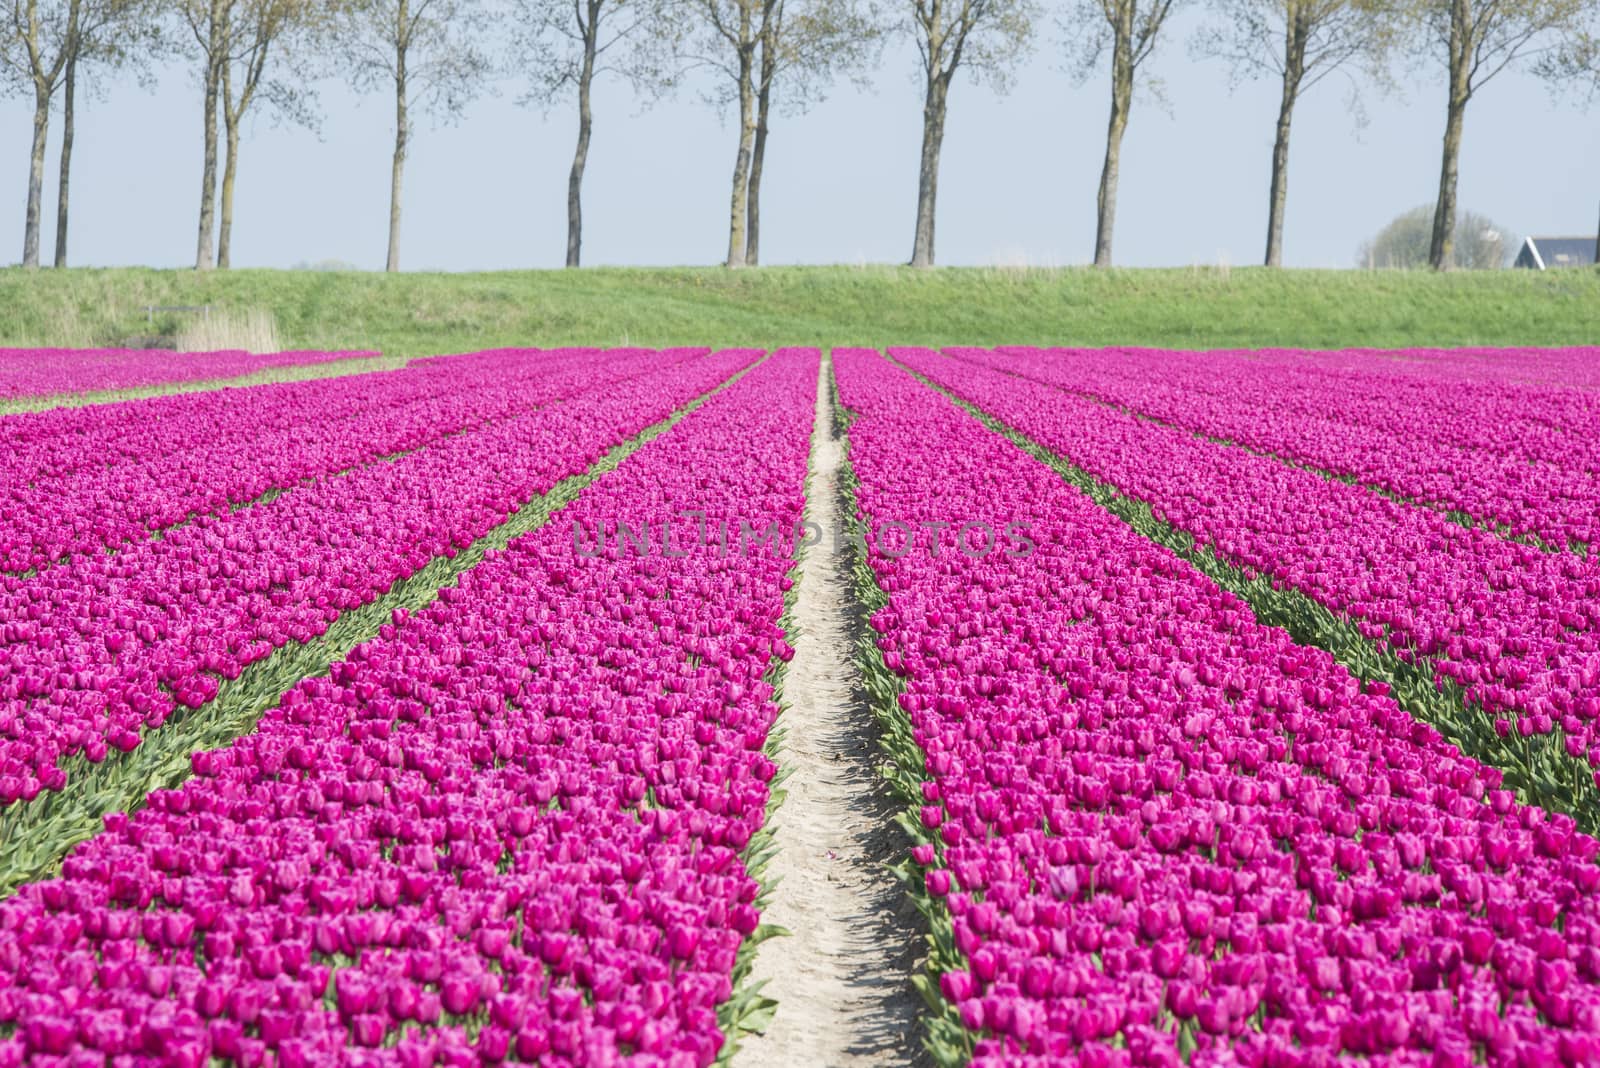 filed of purple tulips in holland on goeree with single tree at the background in holland